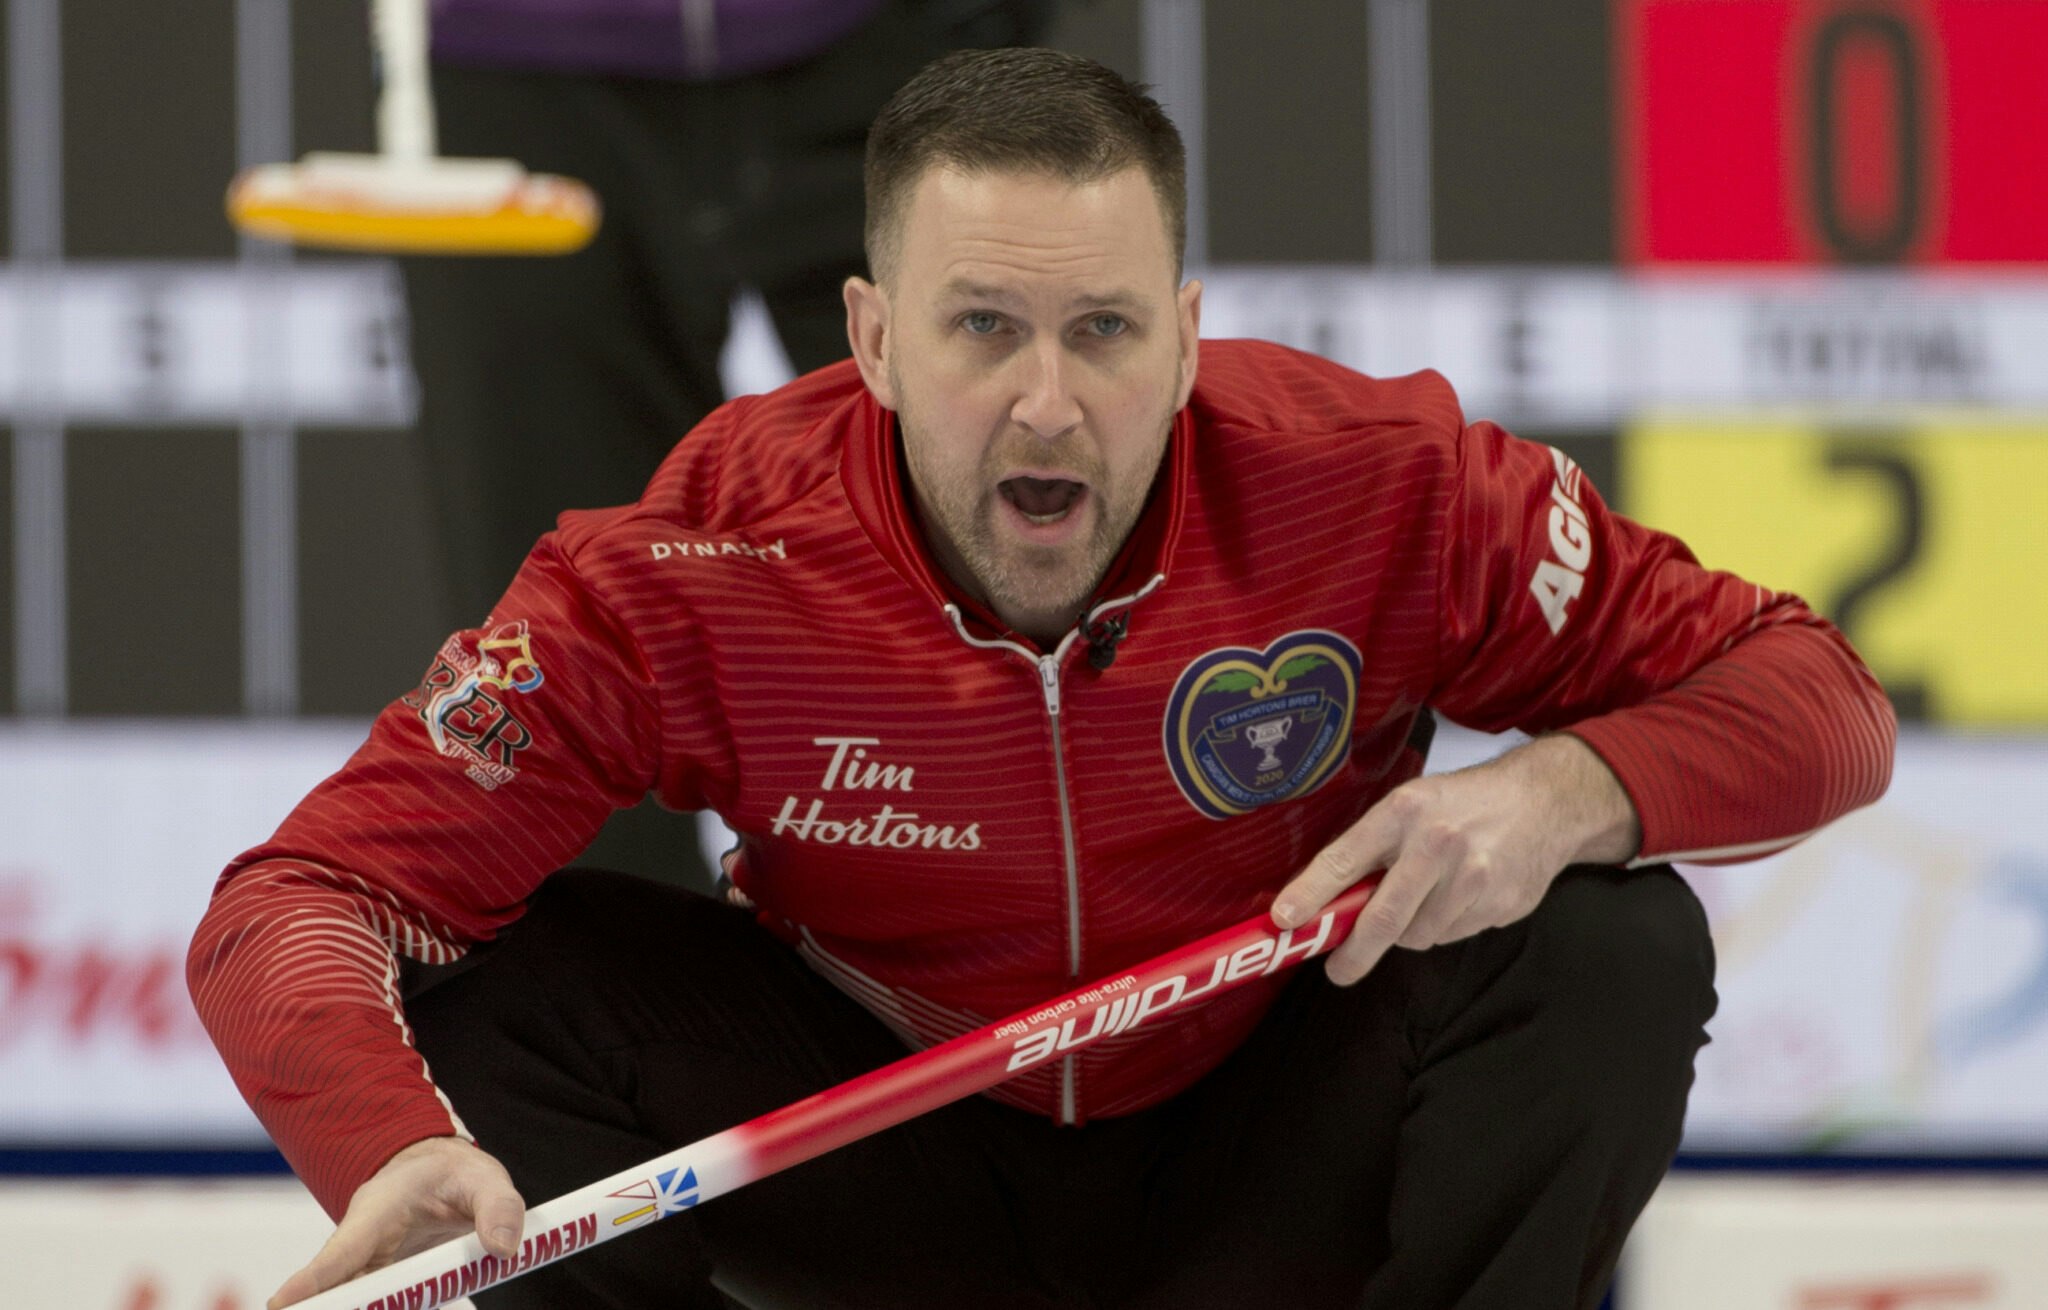 TSNs Season of Champions Continues with Coverage of the 2022 TIM HORTONS BRIER, Beginning March 4